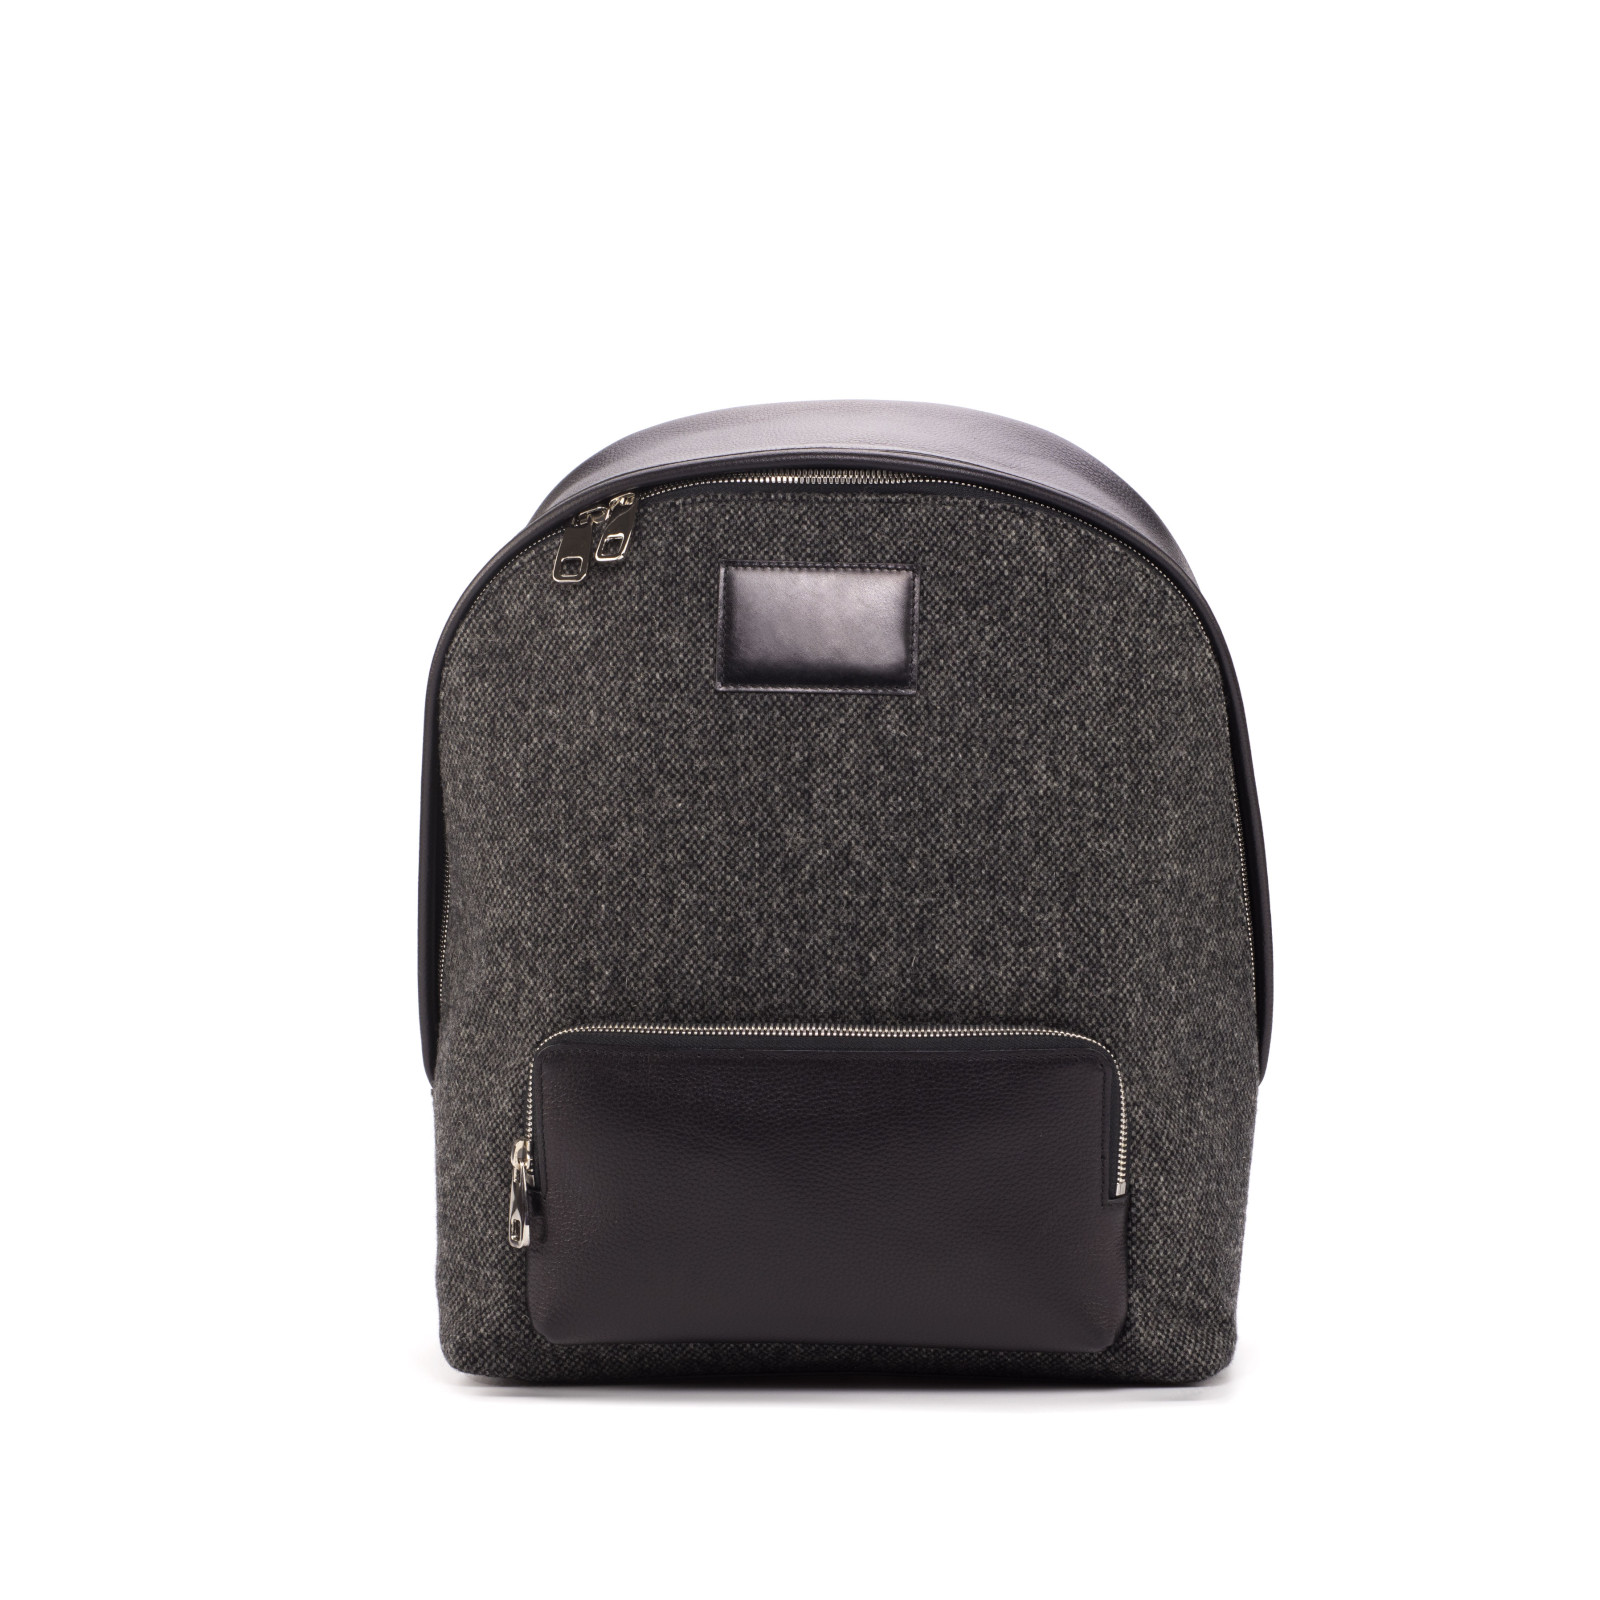 Backpack Product Image